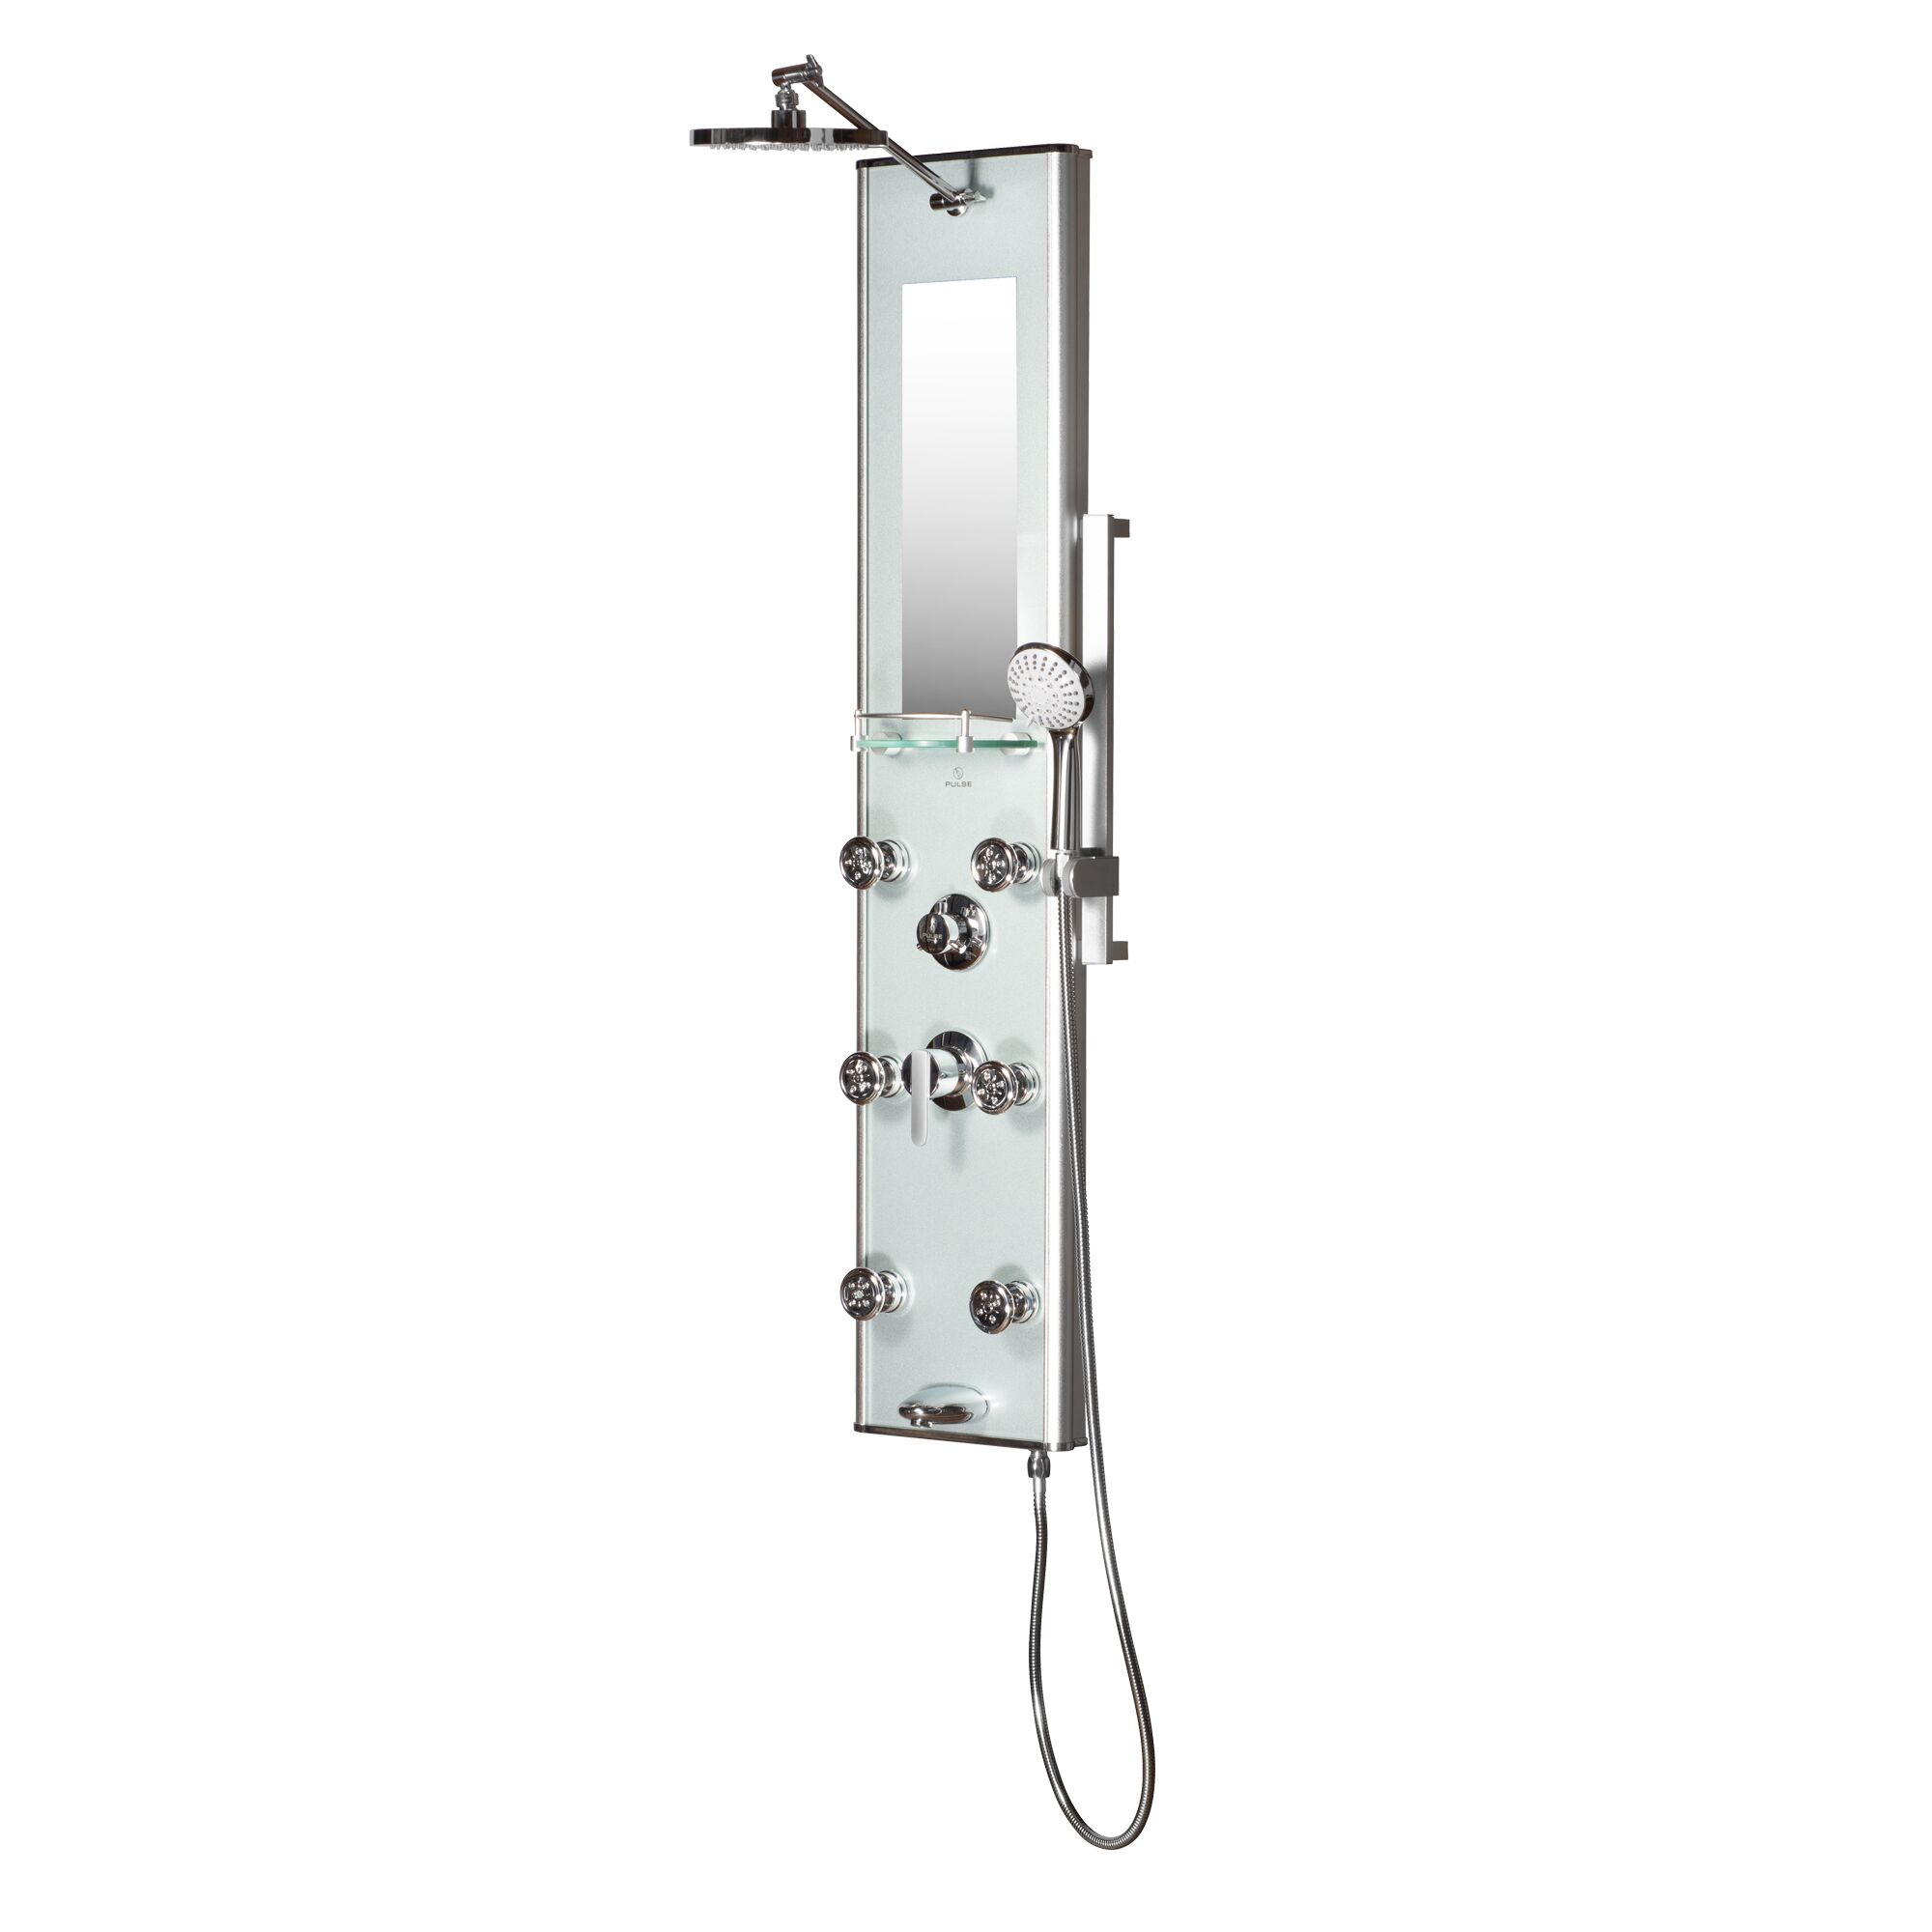 Kihei Ii Tempered Tough Glass Shower Panel, Silver With Chrome Finish